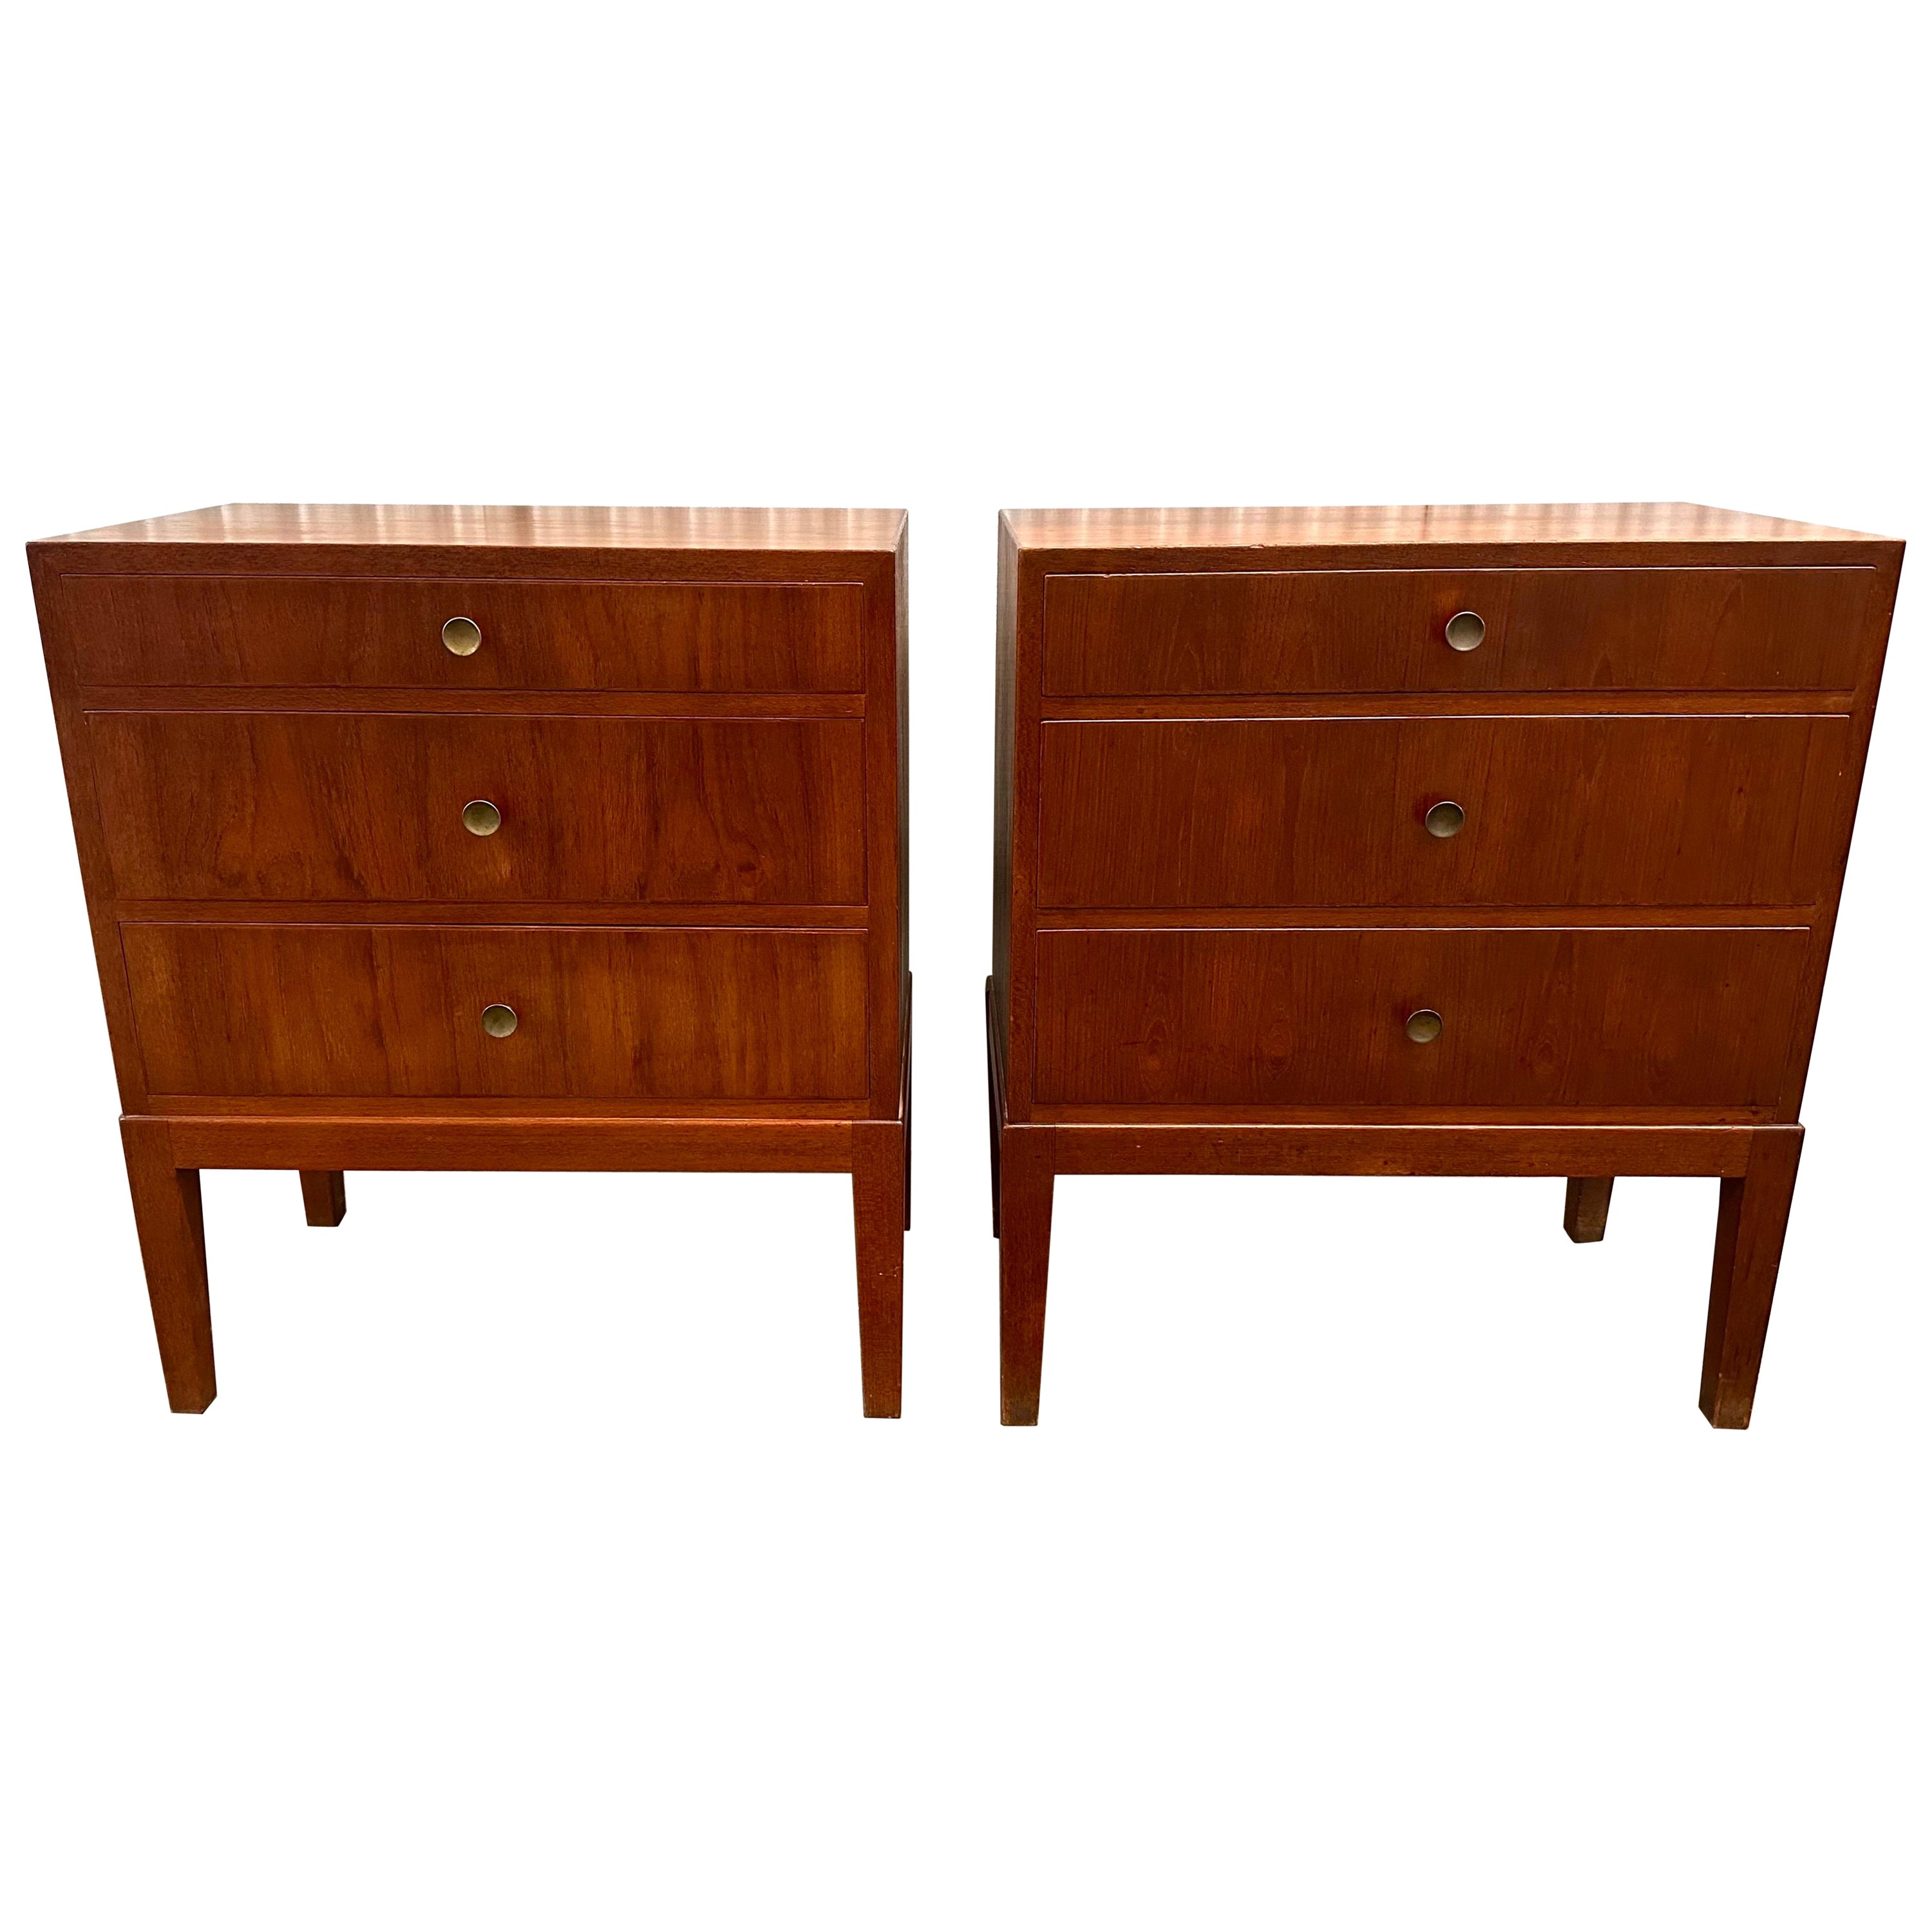 Peter Hvidt for Thorald Madsen, Pair of Petite Teak Cabinets For Sale